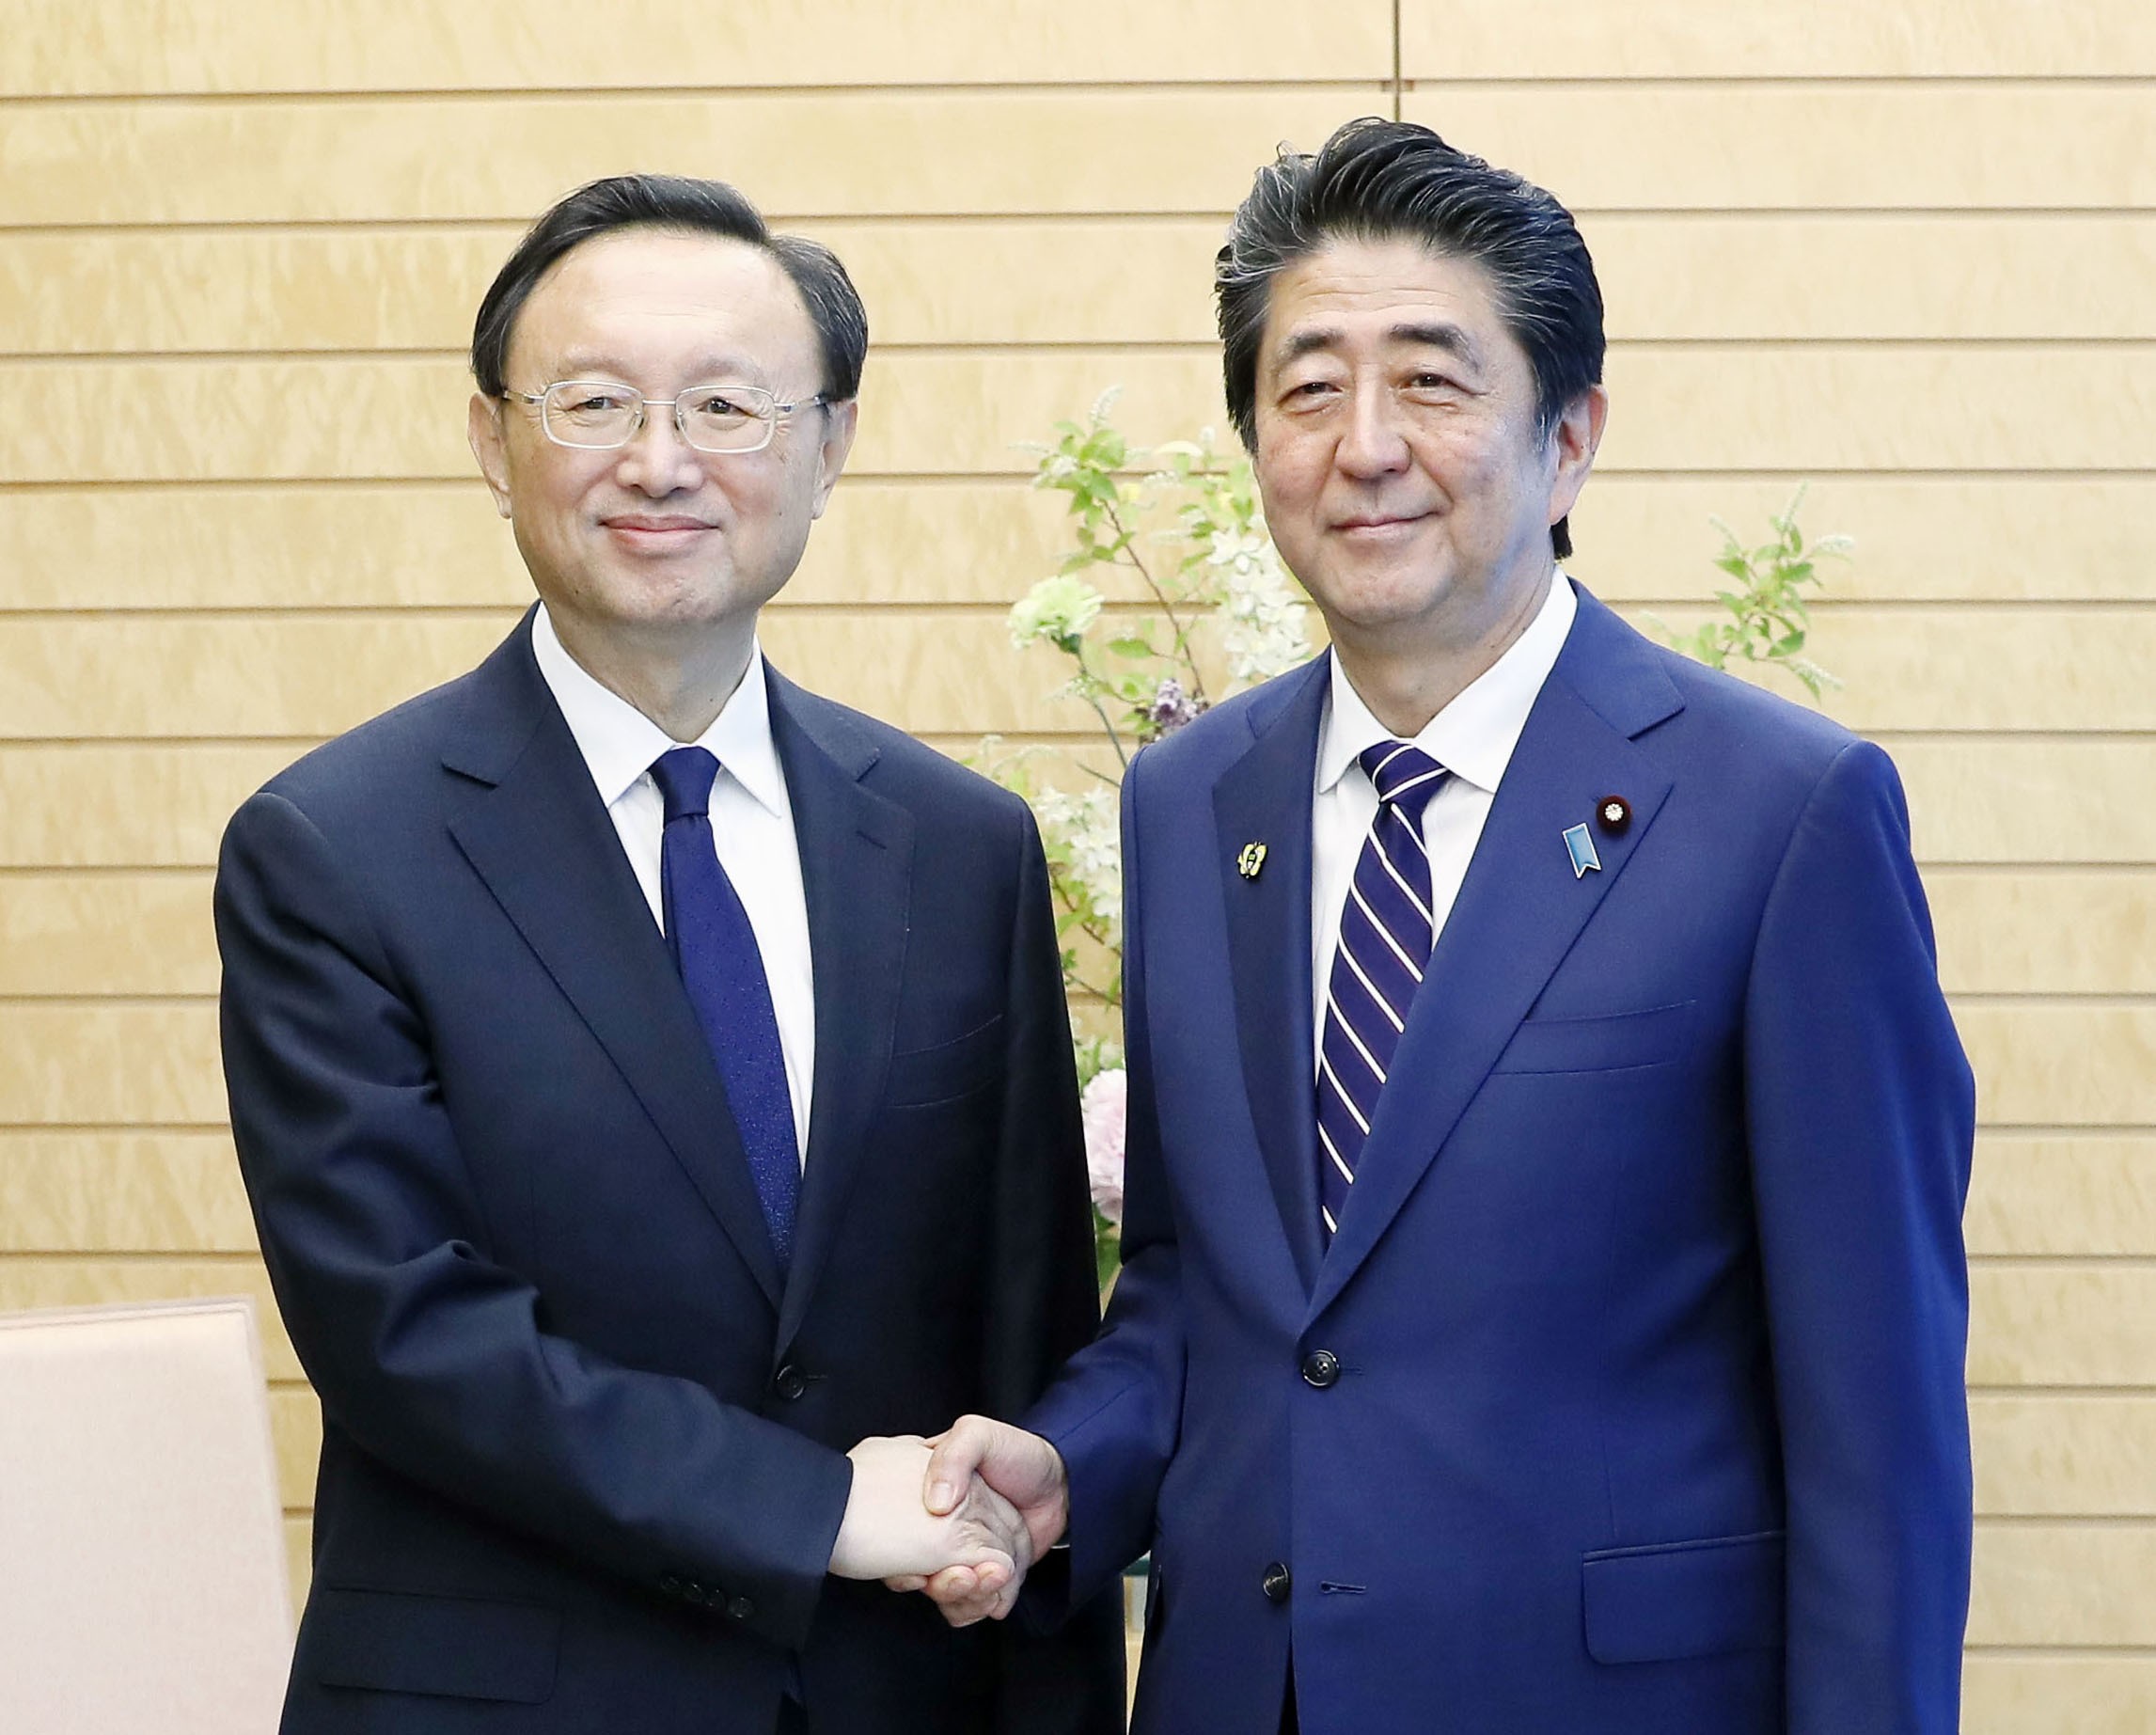 China’s top diplomat Yang Jiechi (left) told Japanese Prime Minister Shinzo Abe he hopes for “healthy, stable” relations between the two countries. Photo: Kyodo